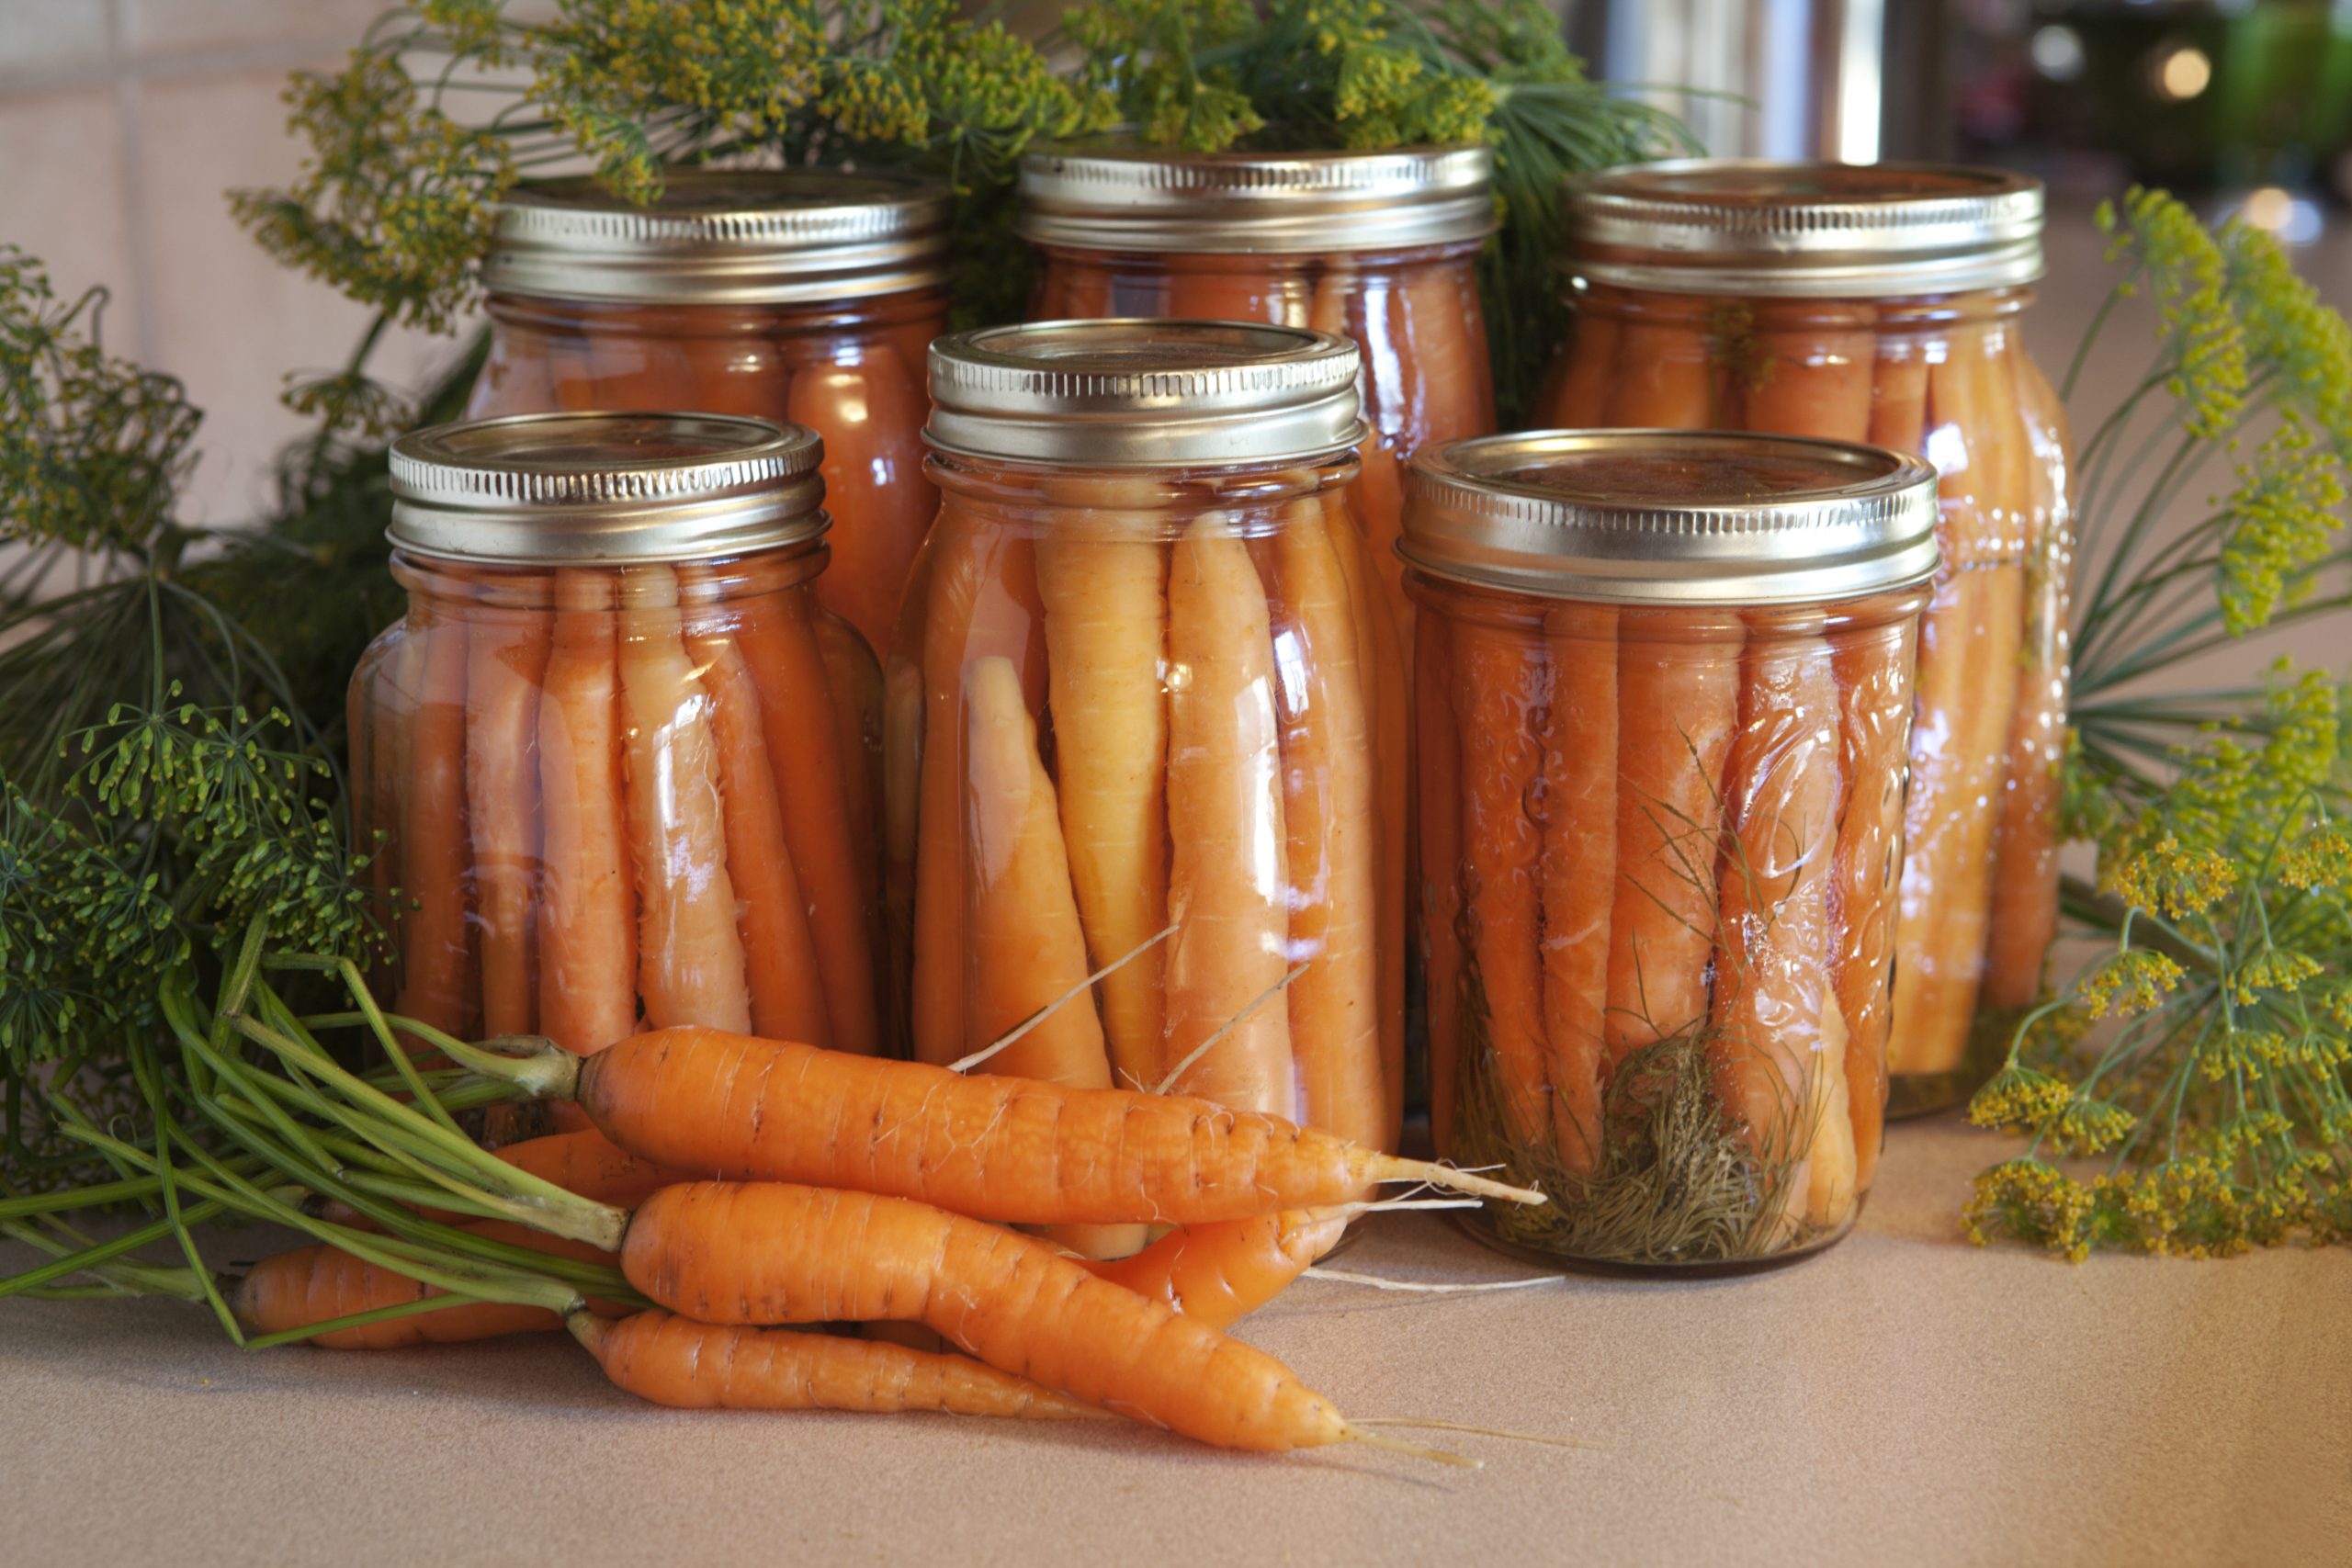 Dilly Carrots Recipe – Canning Carrots photo